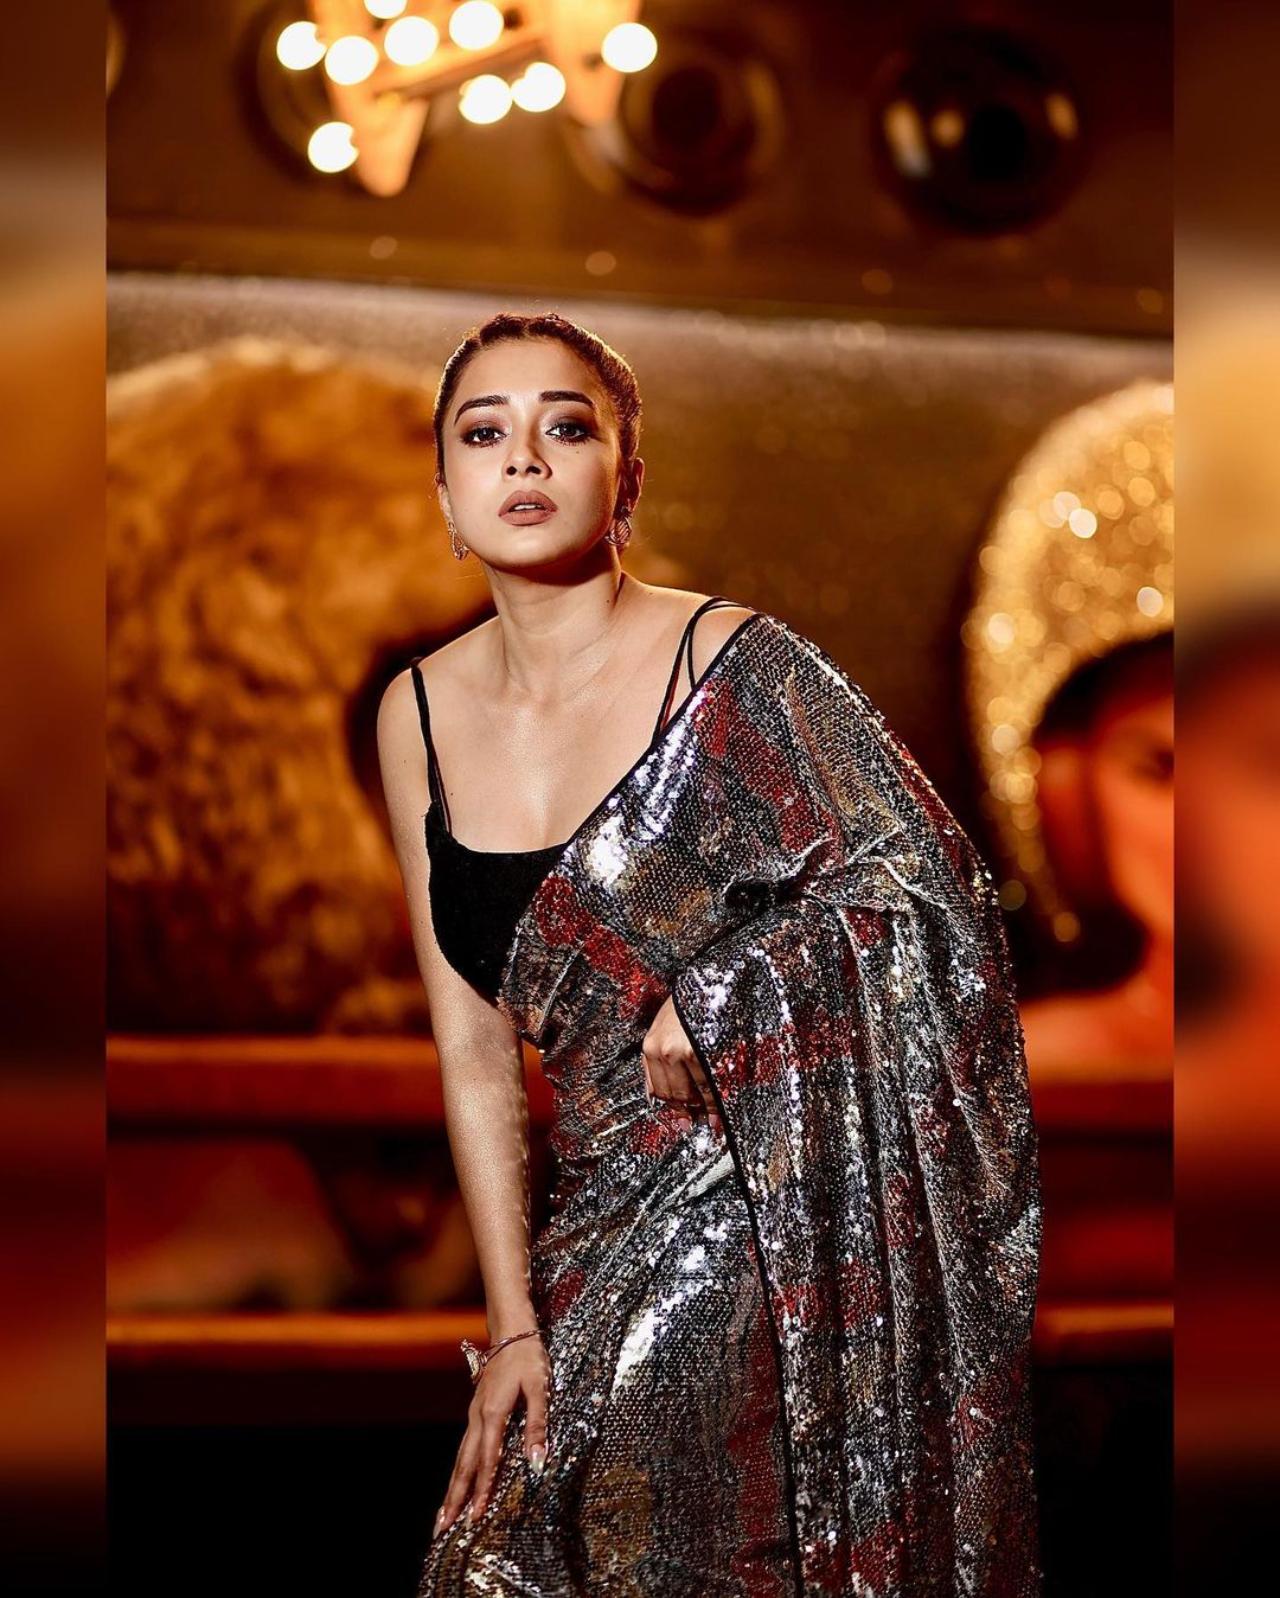 Silver Saree:
This silver saree from Tina's wardrobe is our ultimate steal outfit! Looking absolutely gorgeous in this indo western saree, pulled back hair and subtle makeup to complete the look, Tina is flawless in this attire